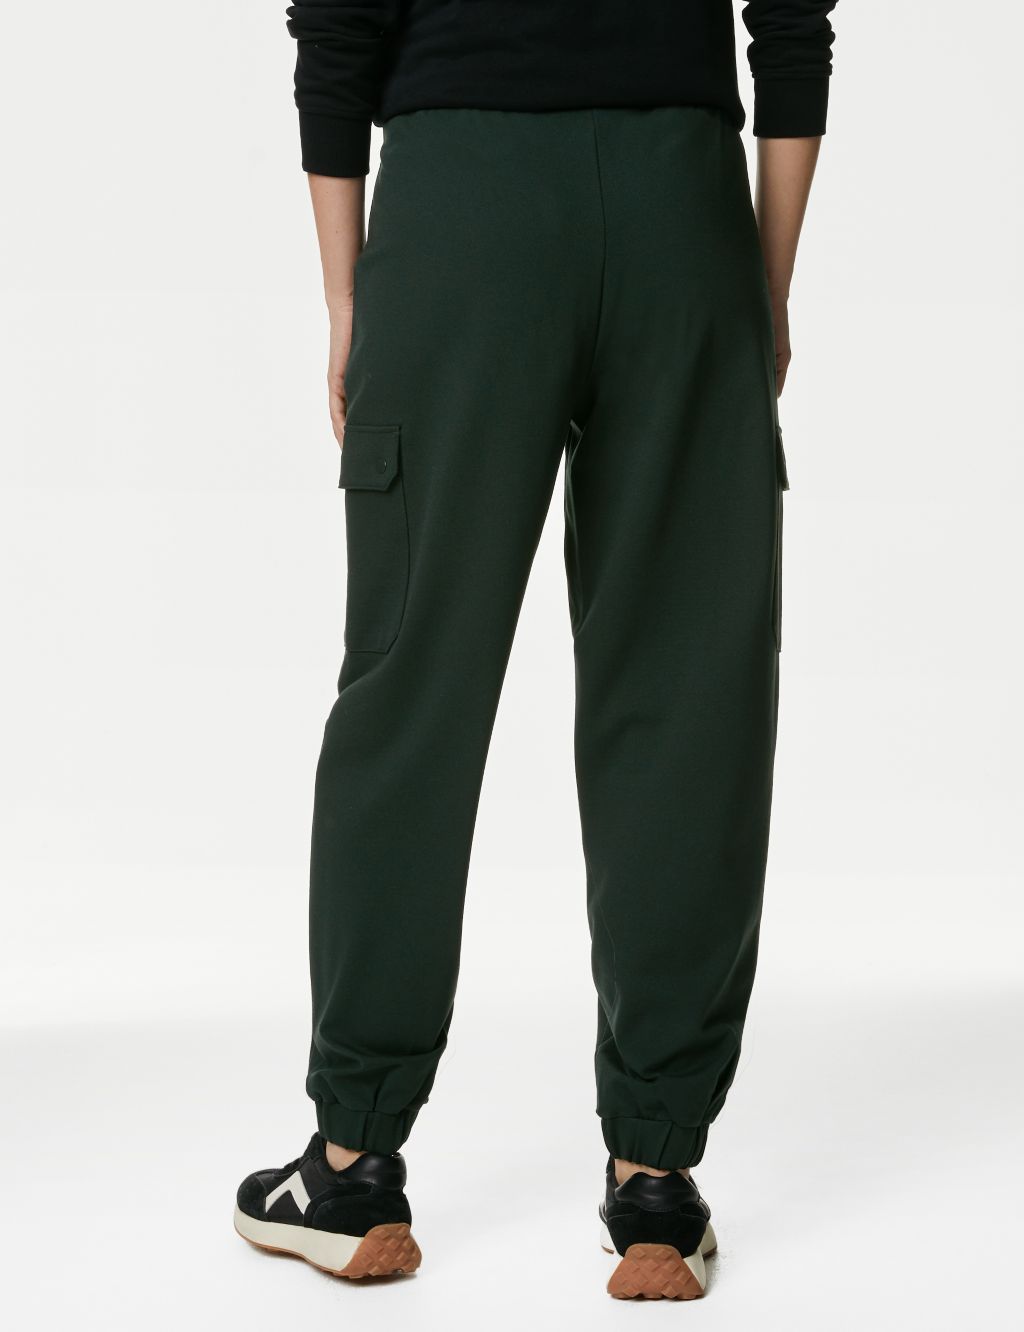 Ponte Utility Tapered Ankle Grazer Joggers image 5